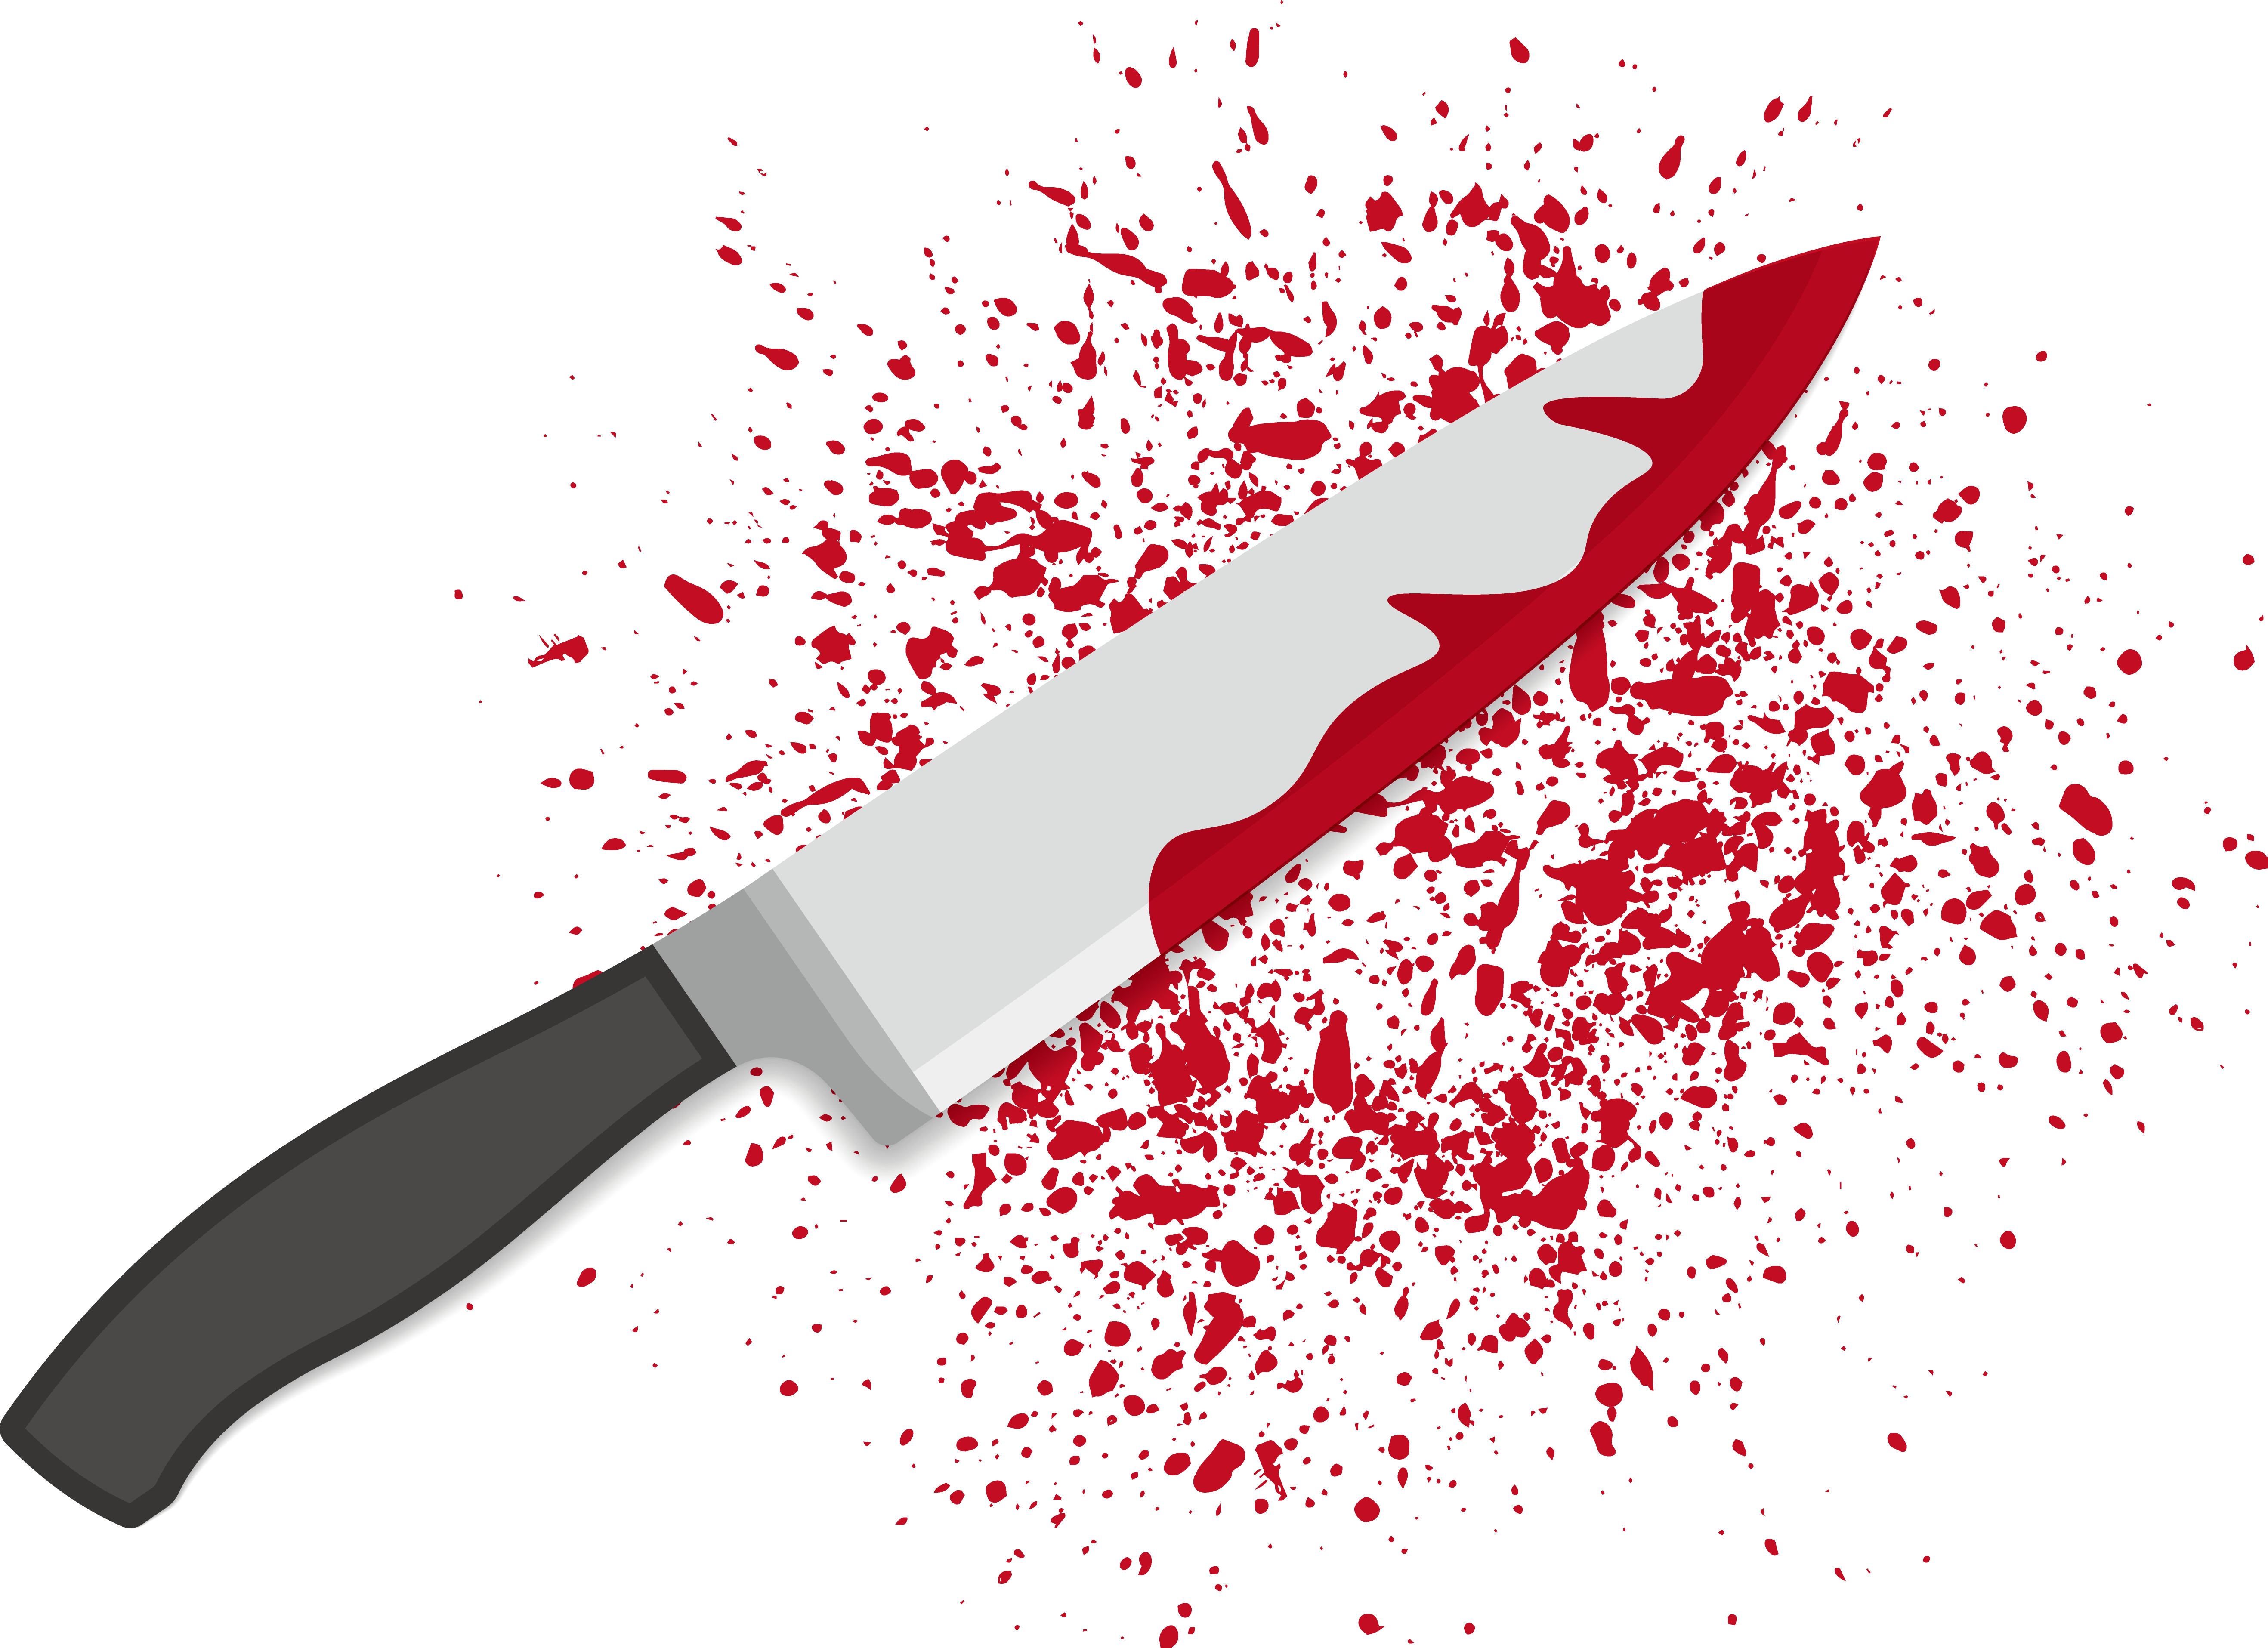 Knife with blood png. Knives and splashes of